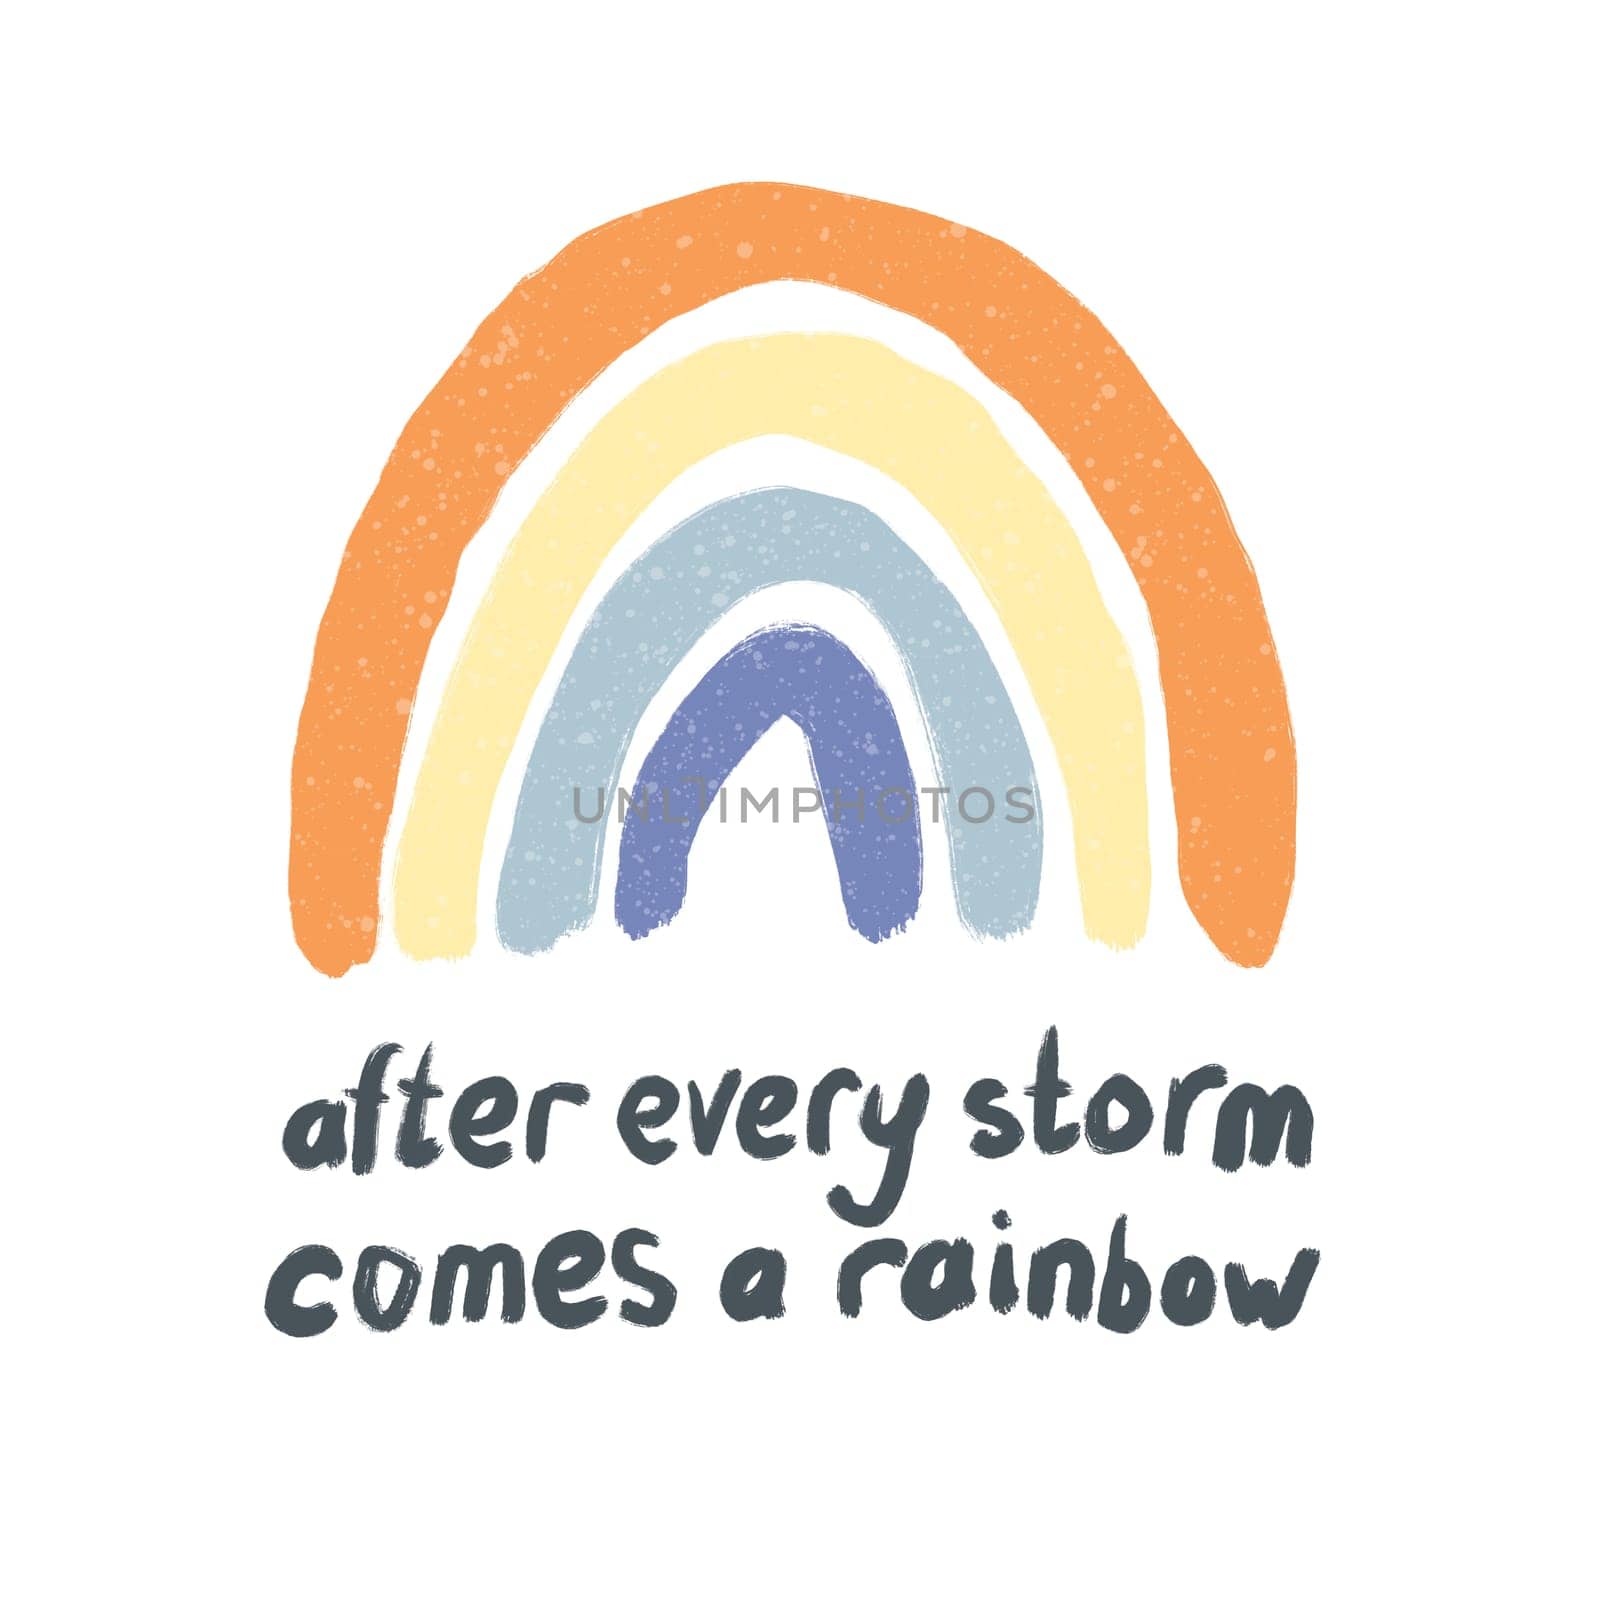 Hand drawn illustration of rainbow. After every storm comes a rainbow. Orange beige blue design in boho style for kids nursery decor, baby cartoon poster in minimalist print. by Lagmar